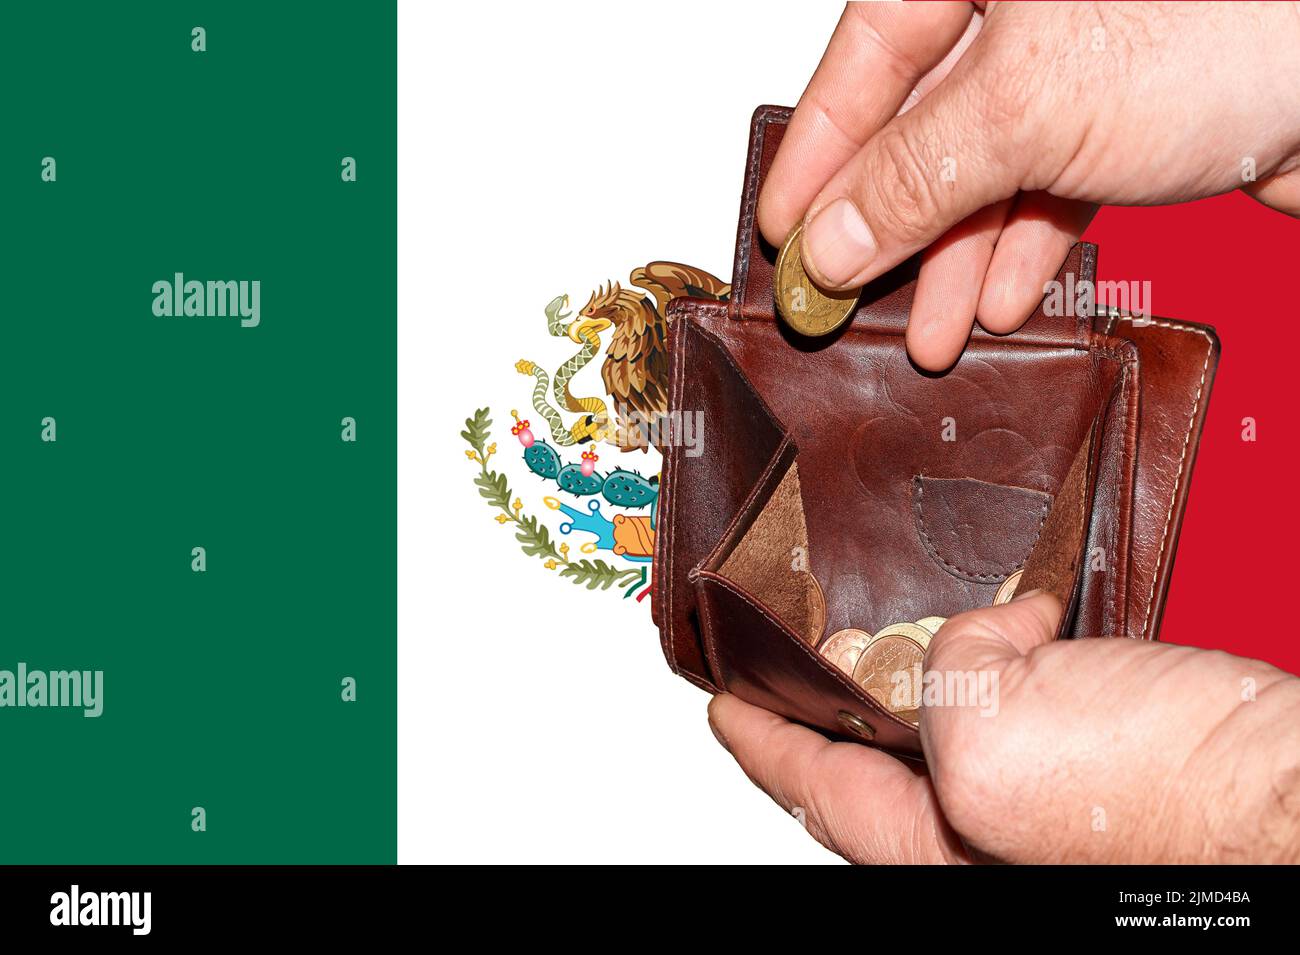 Empty wallet shows the global financial economic crisis triggered by the corona virus in Mexico Stock Photo